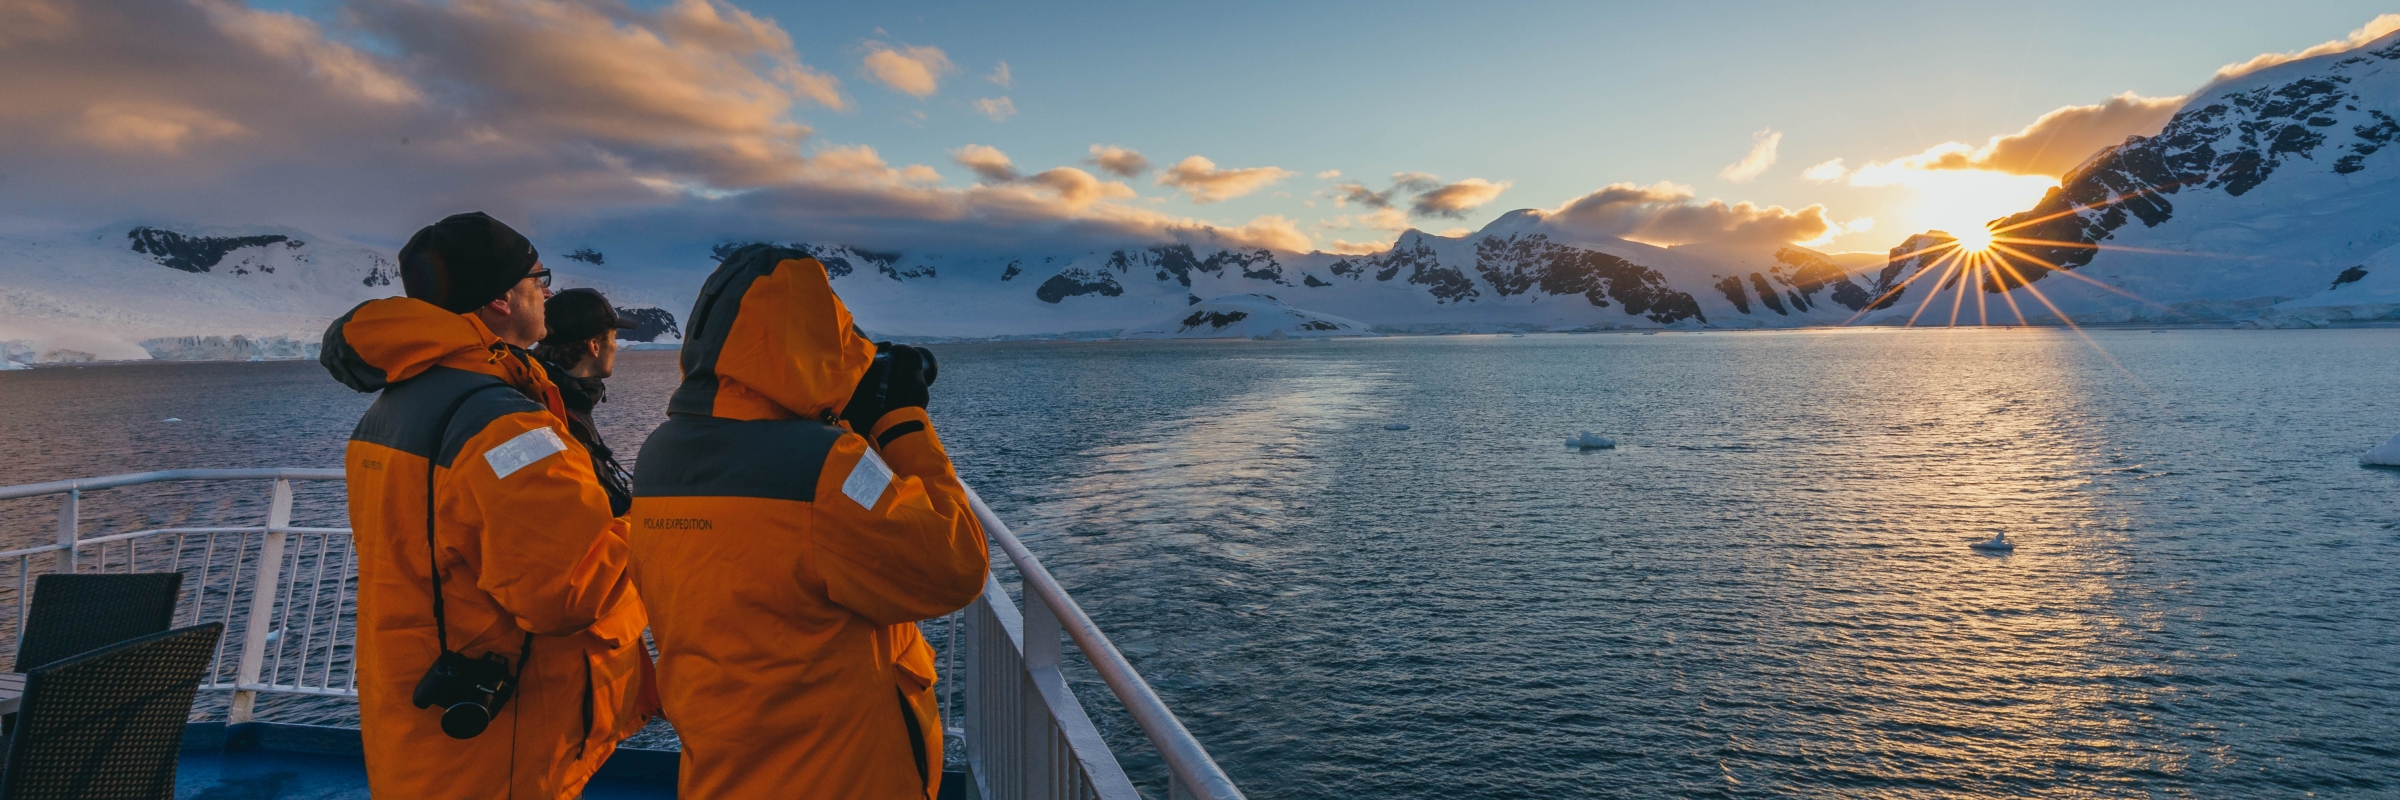 Guests photographing the Antarctic landscapes from the deck of their expedition vessel. Photo by David Merron.